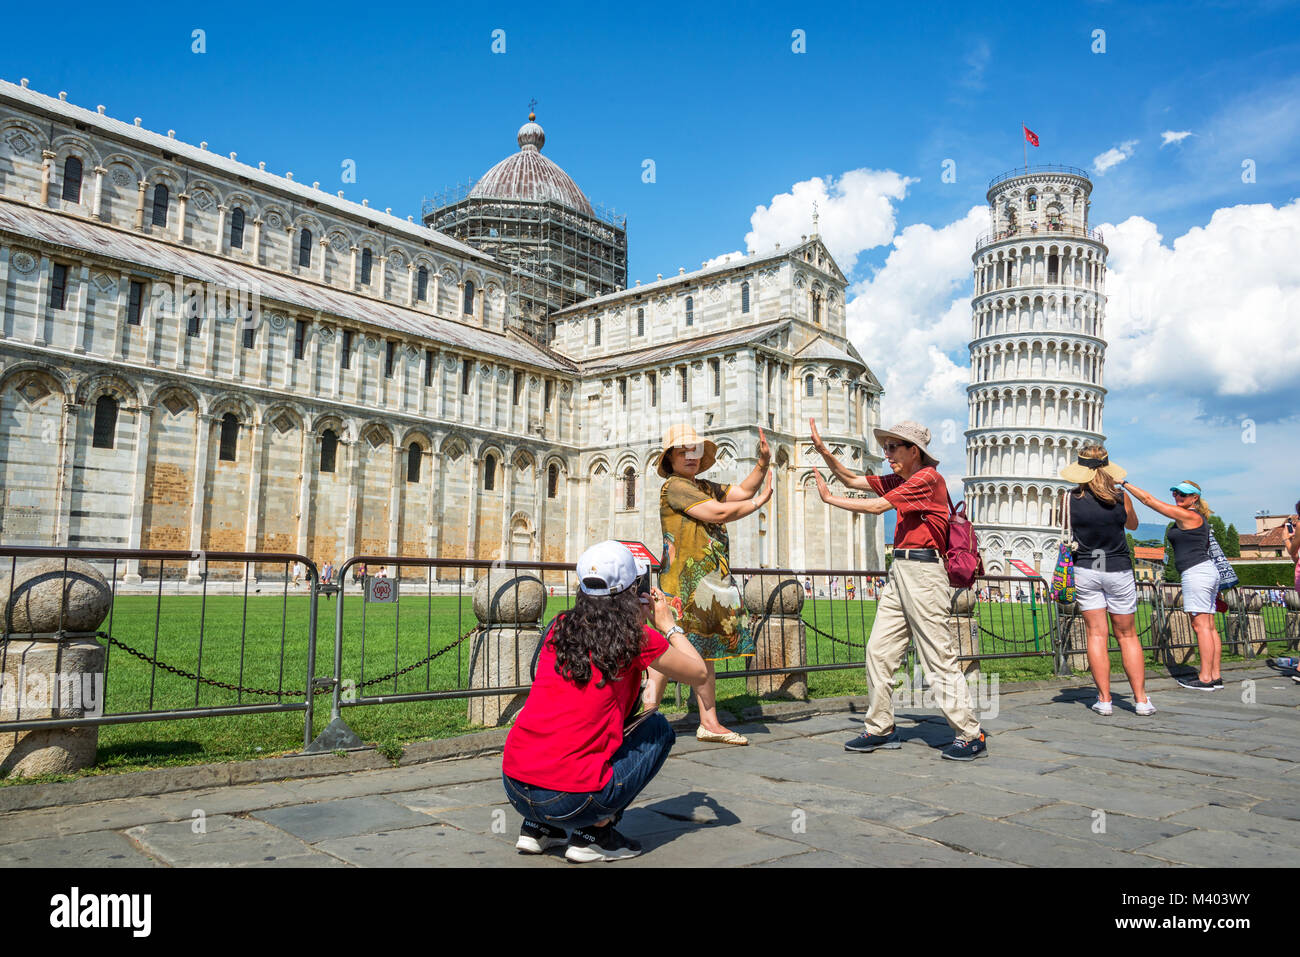 People having fun and taking pictures of the leaning tower of Pisa in Tuscany, Italy Stock Photo